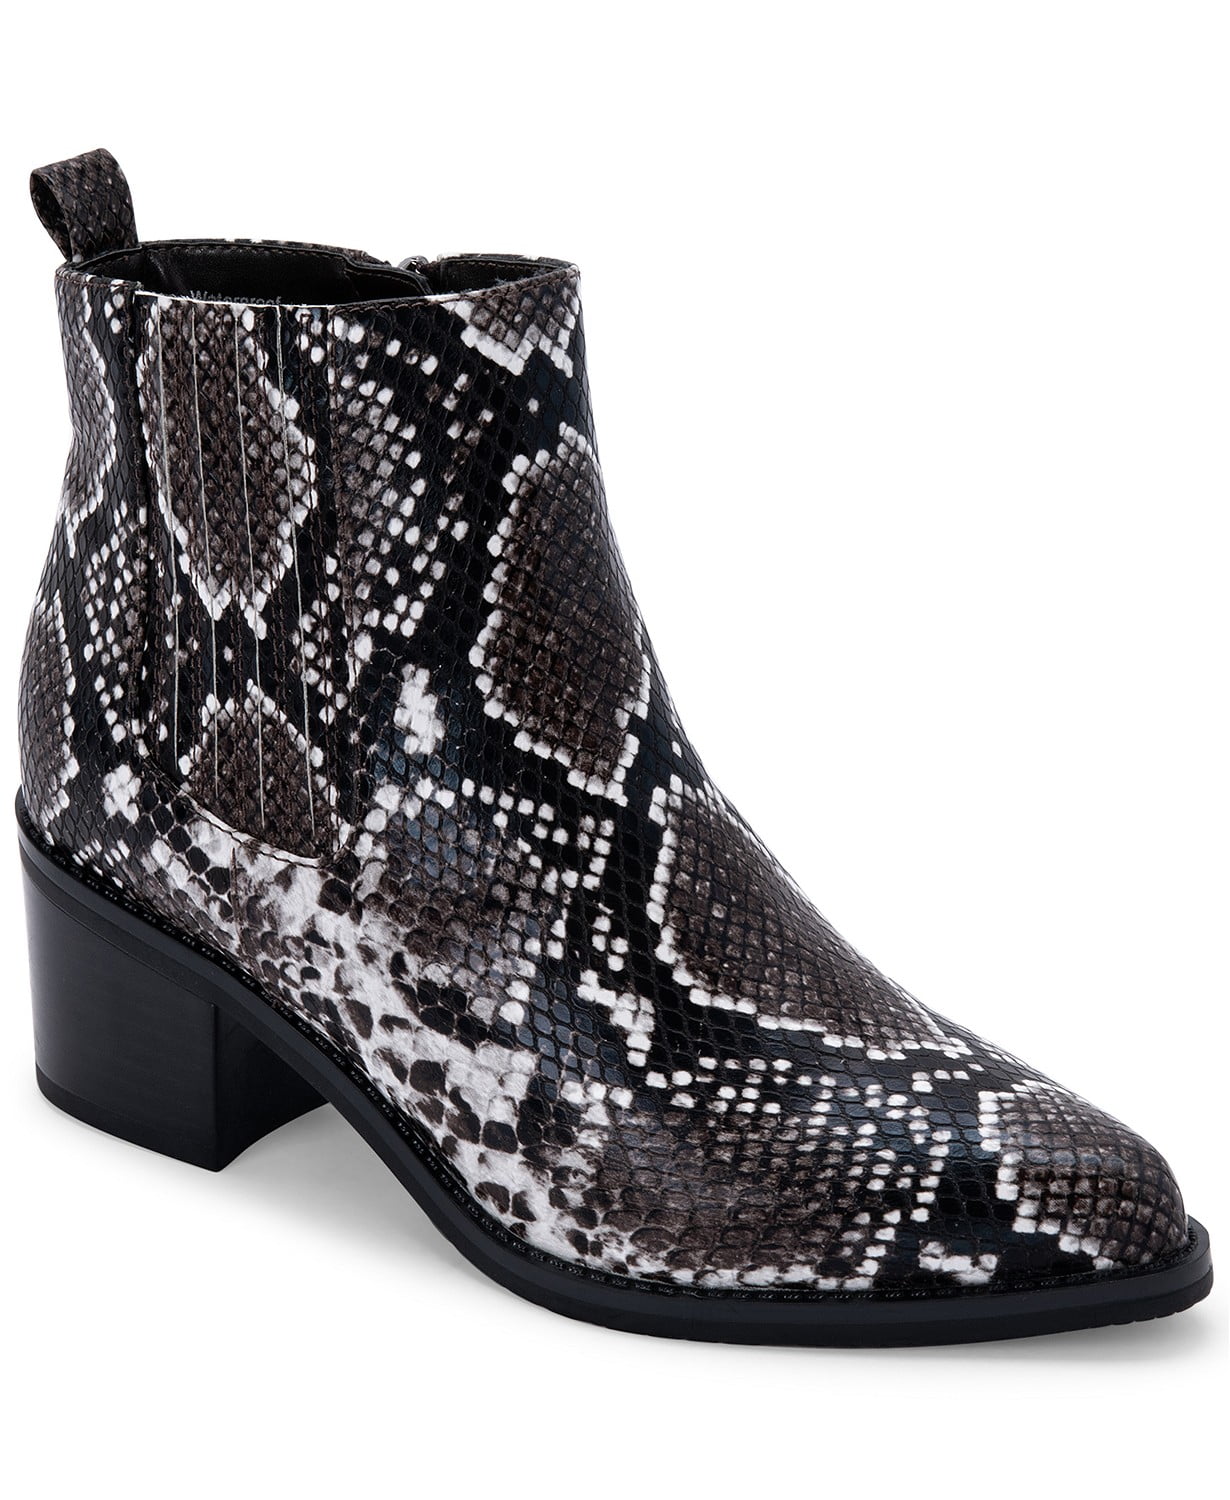 www.couturepoint.com-aqua-college-womens-black-leather-python-print-karlie-waterproof-booties